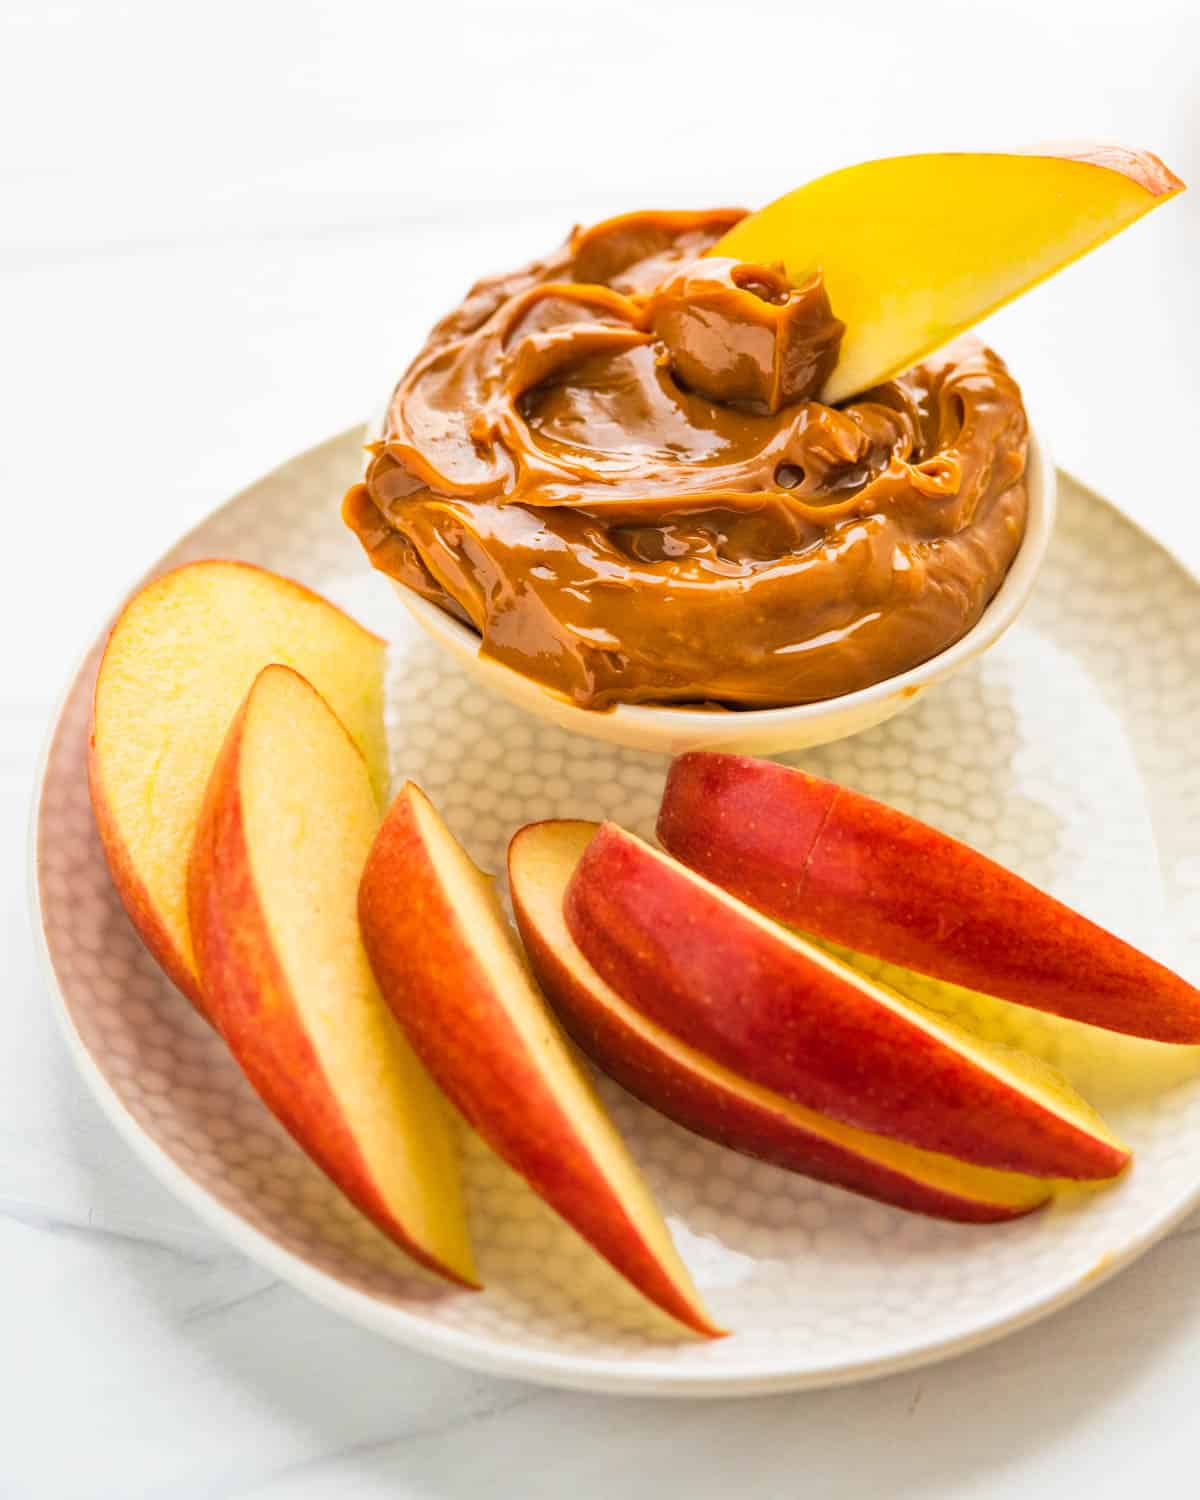 Sliced apples and dulce de leche for dipping.